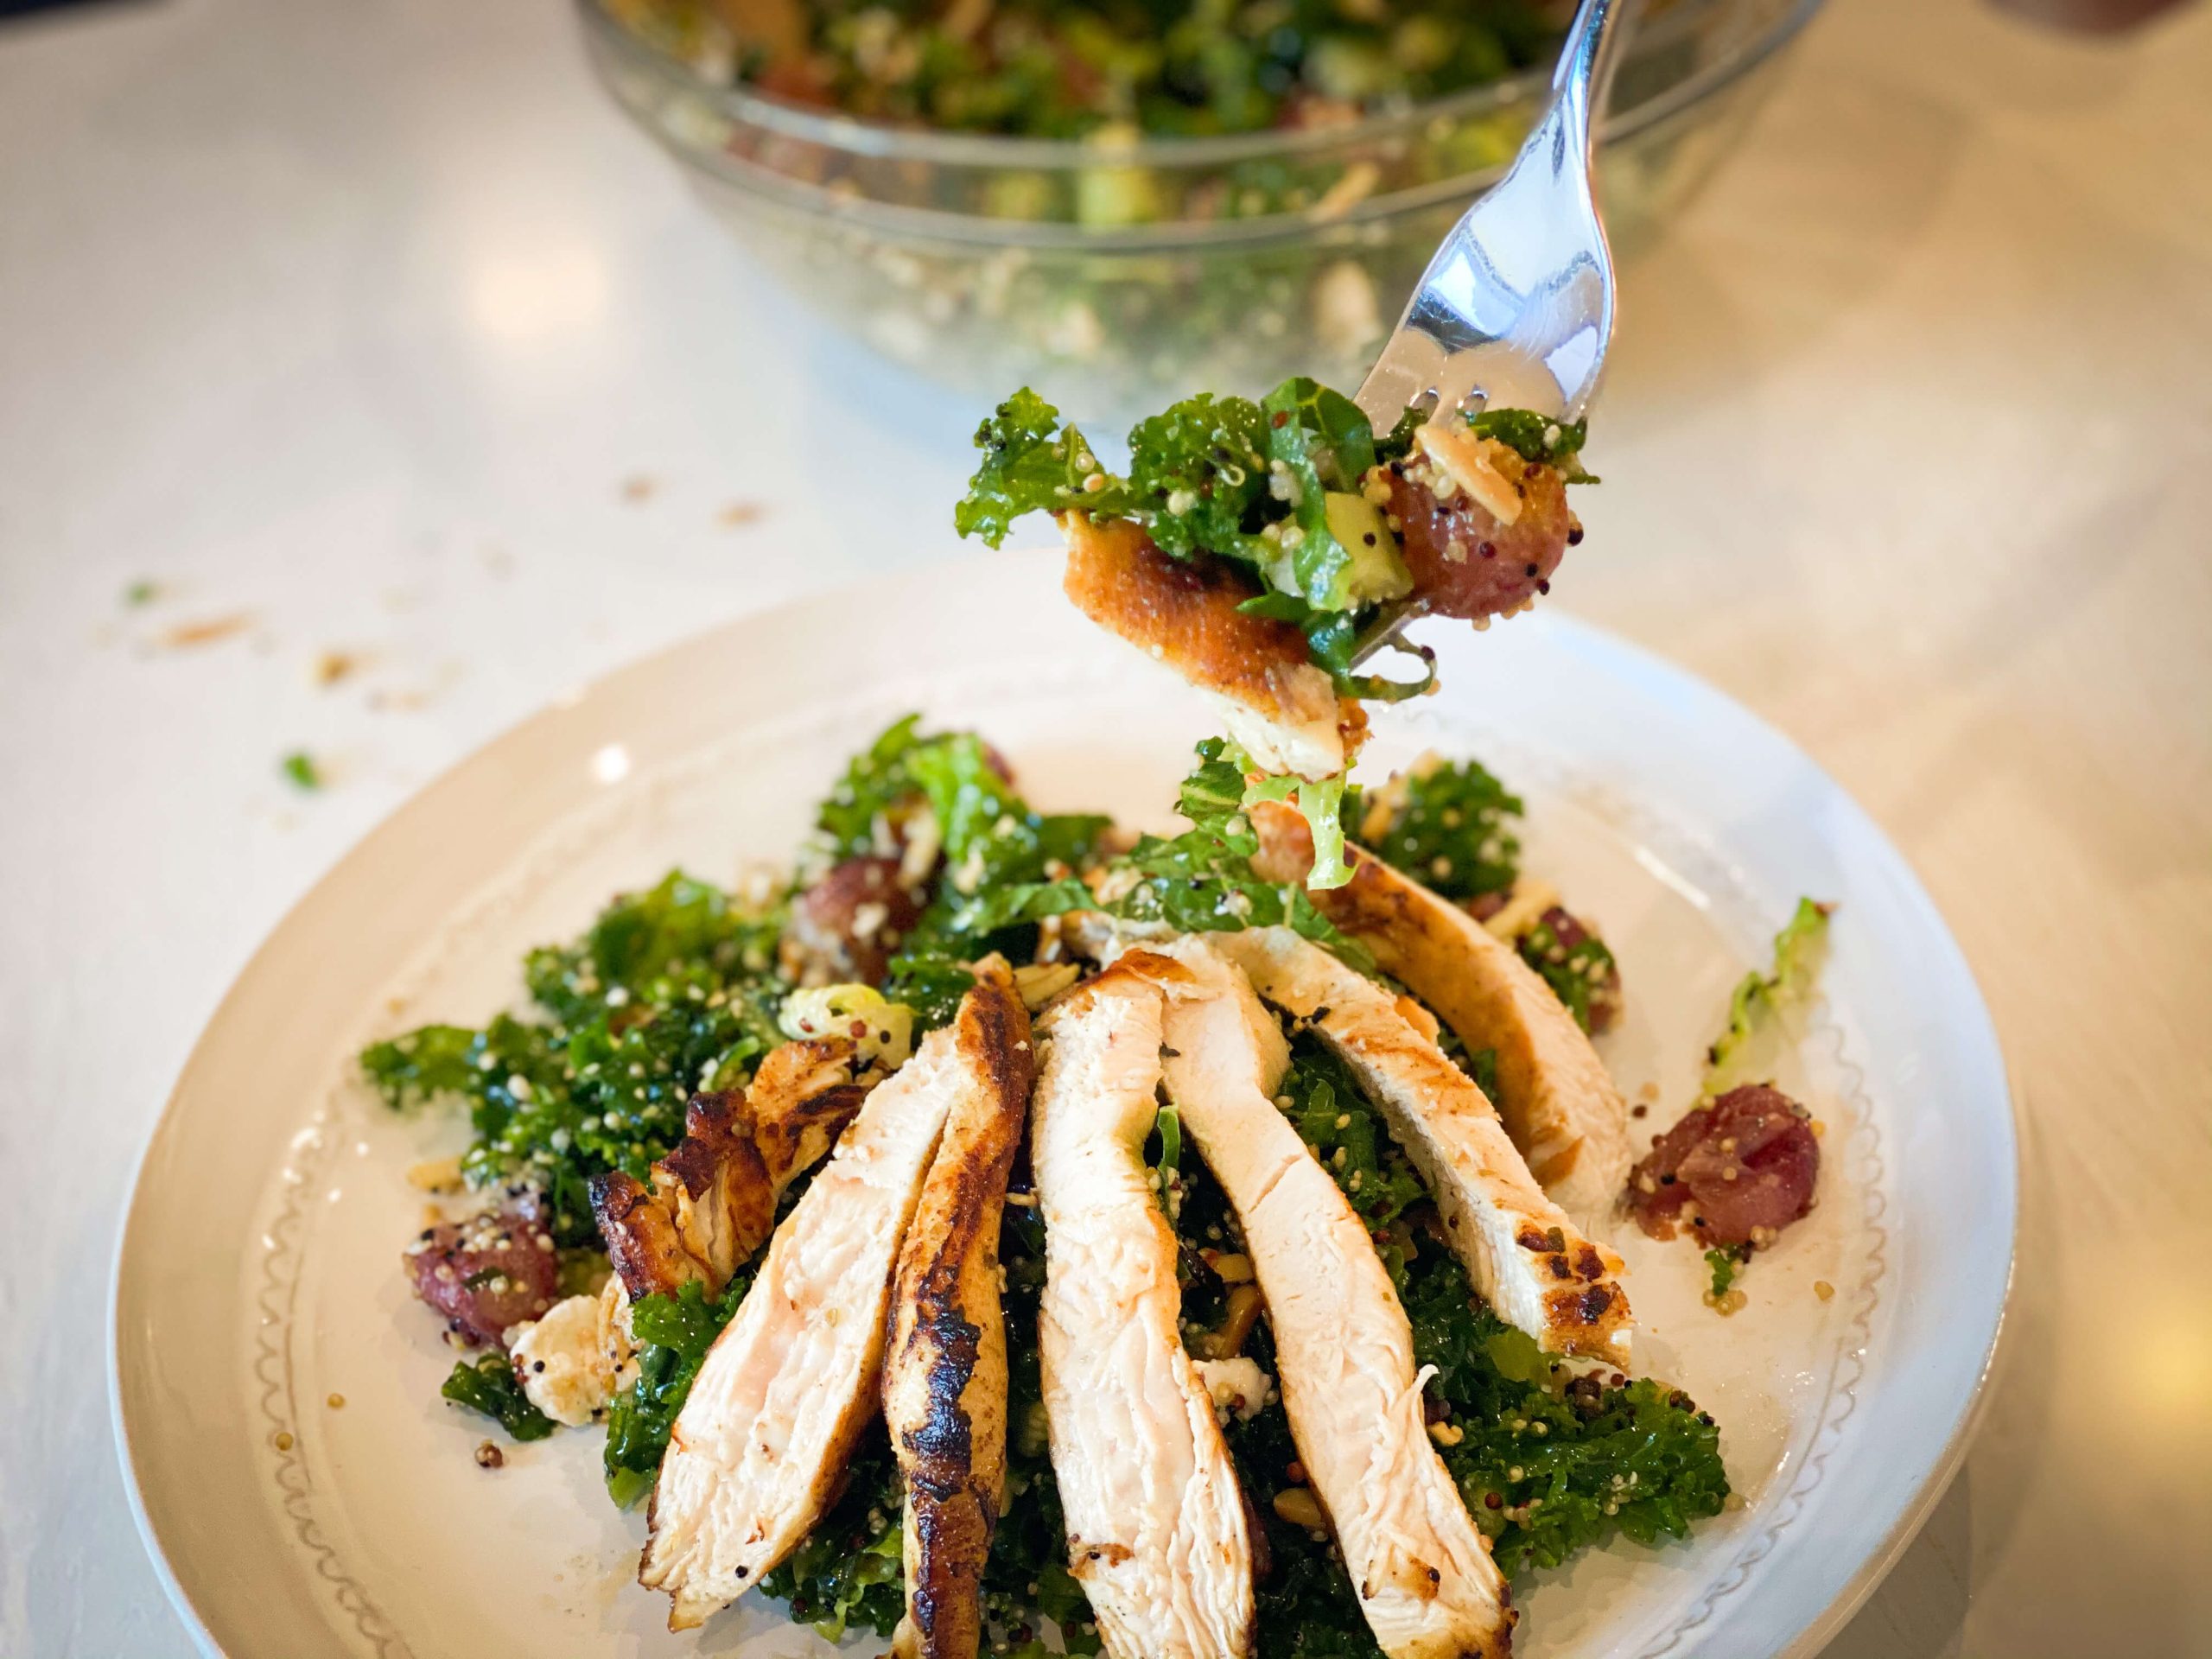 Kale quinoa salad with roasted-grapes being served